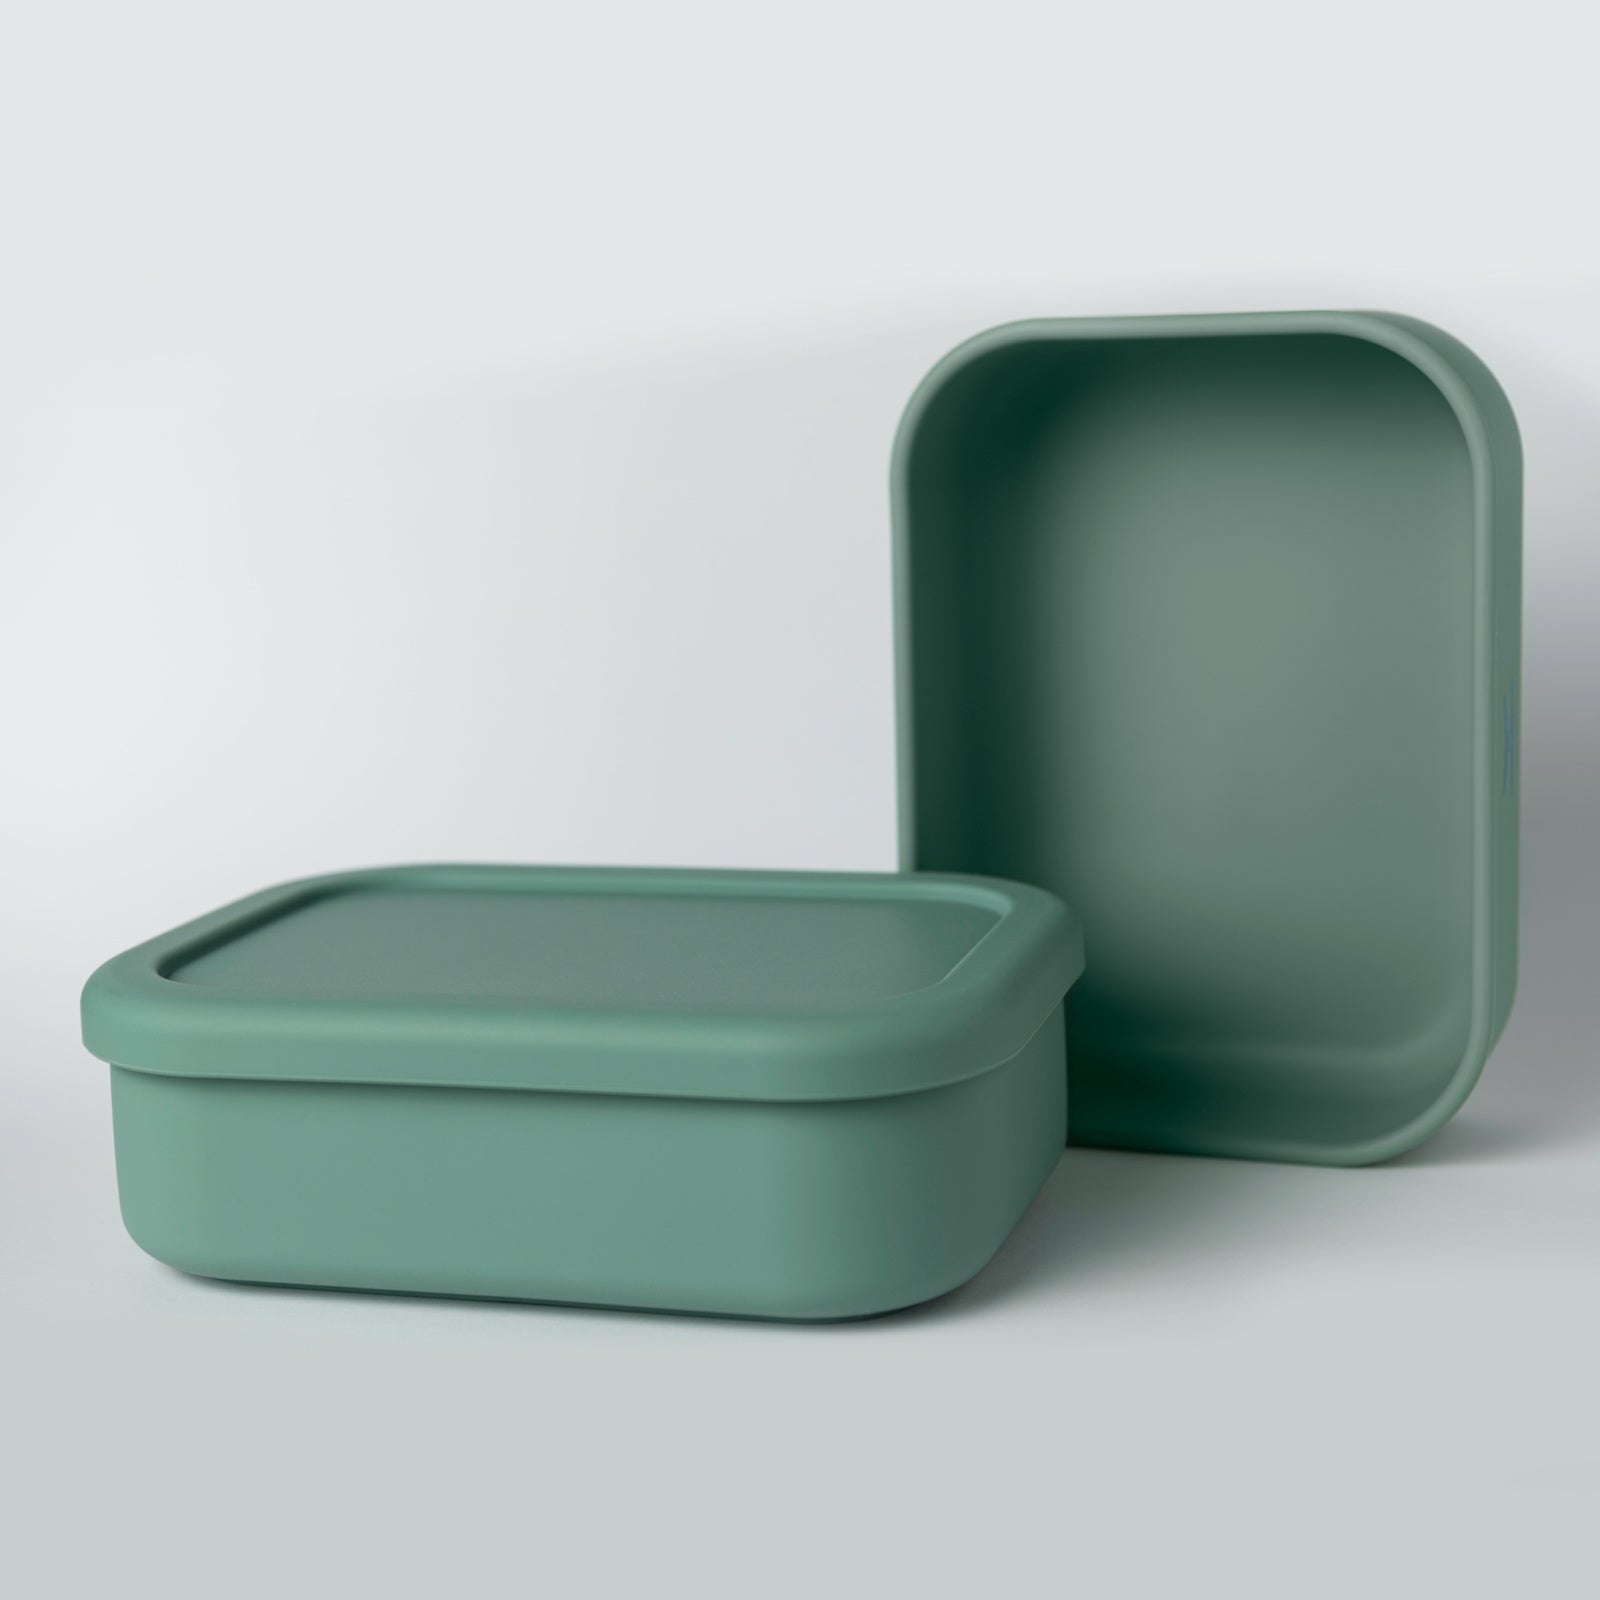 NO Compartments Green by Unplastik | Shop at The Green Collective